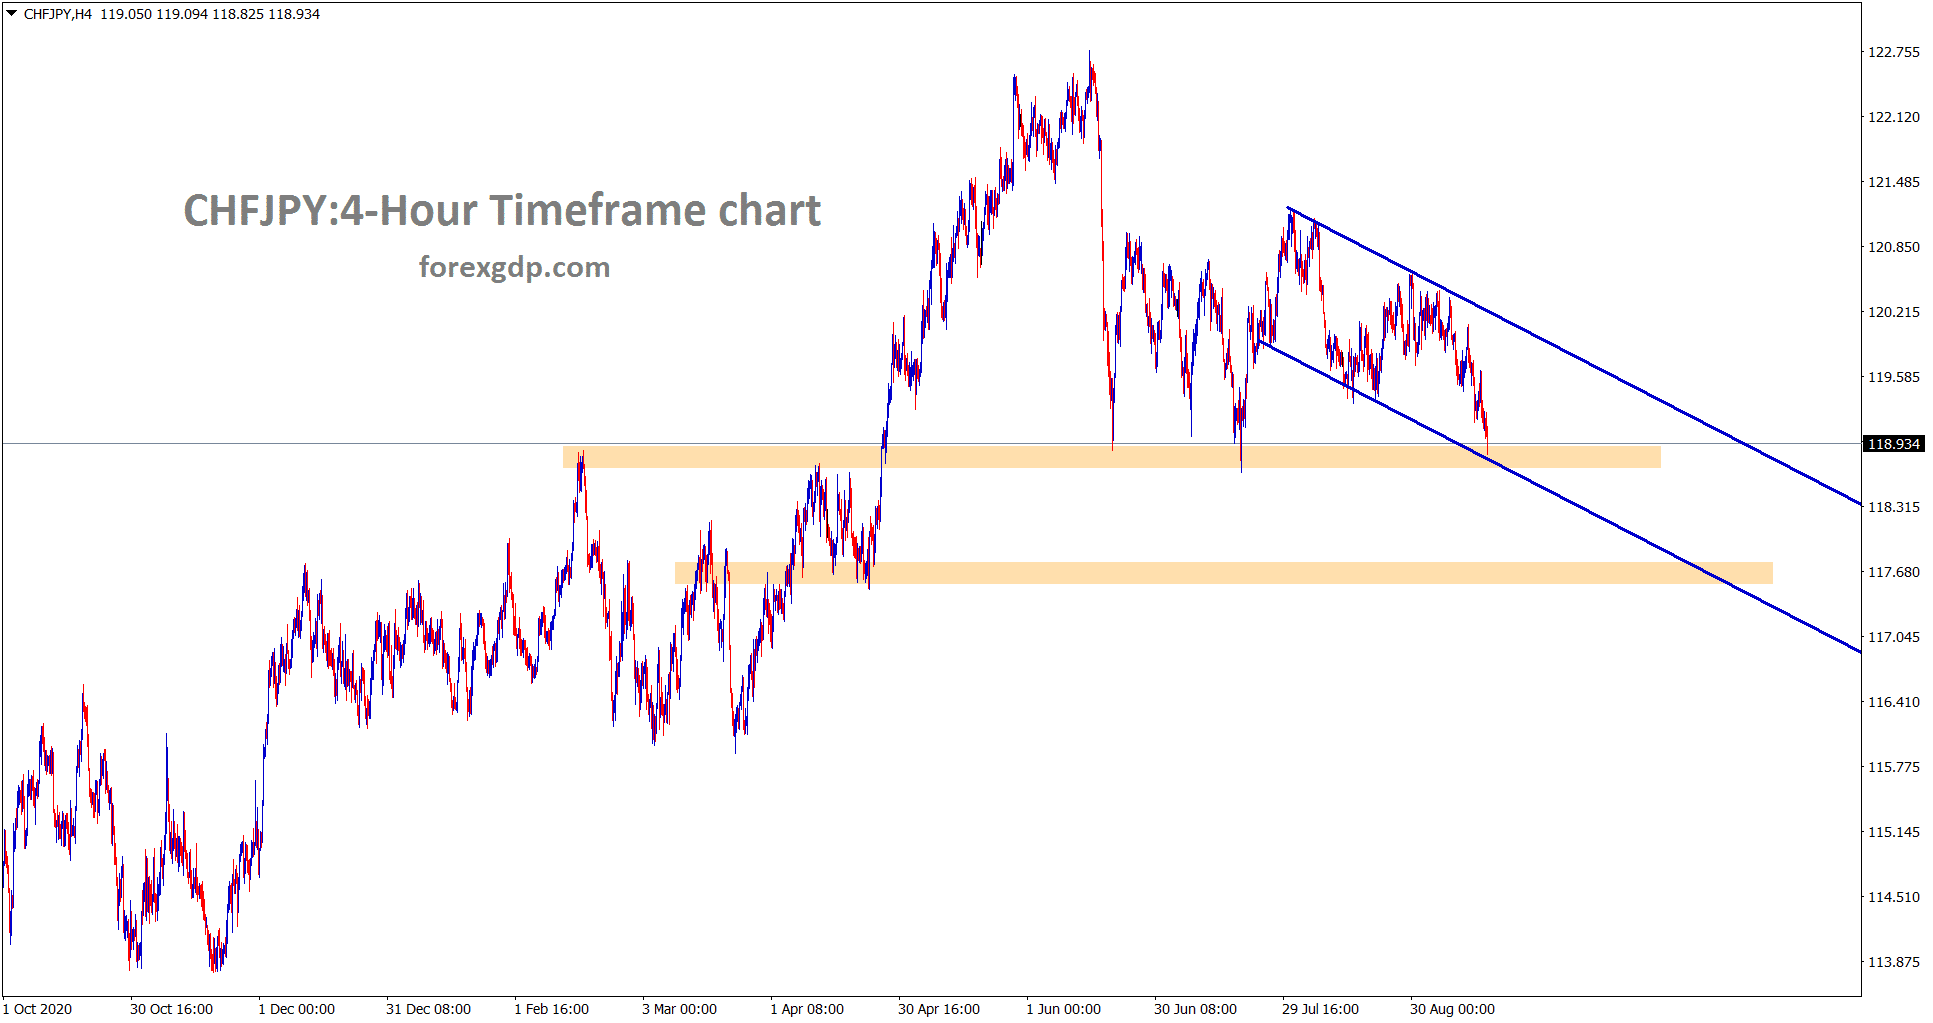 CHFJPY is standing at the lower low of the channel and the major support area